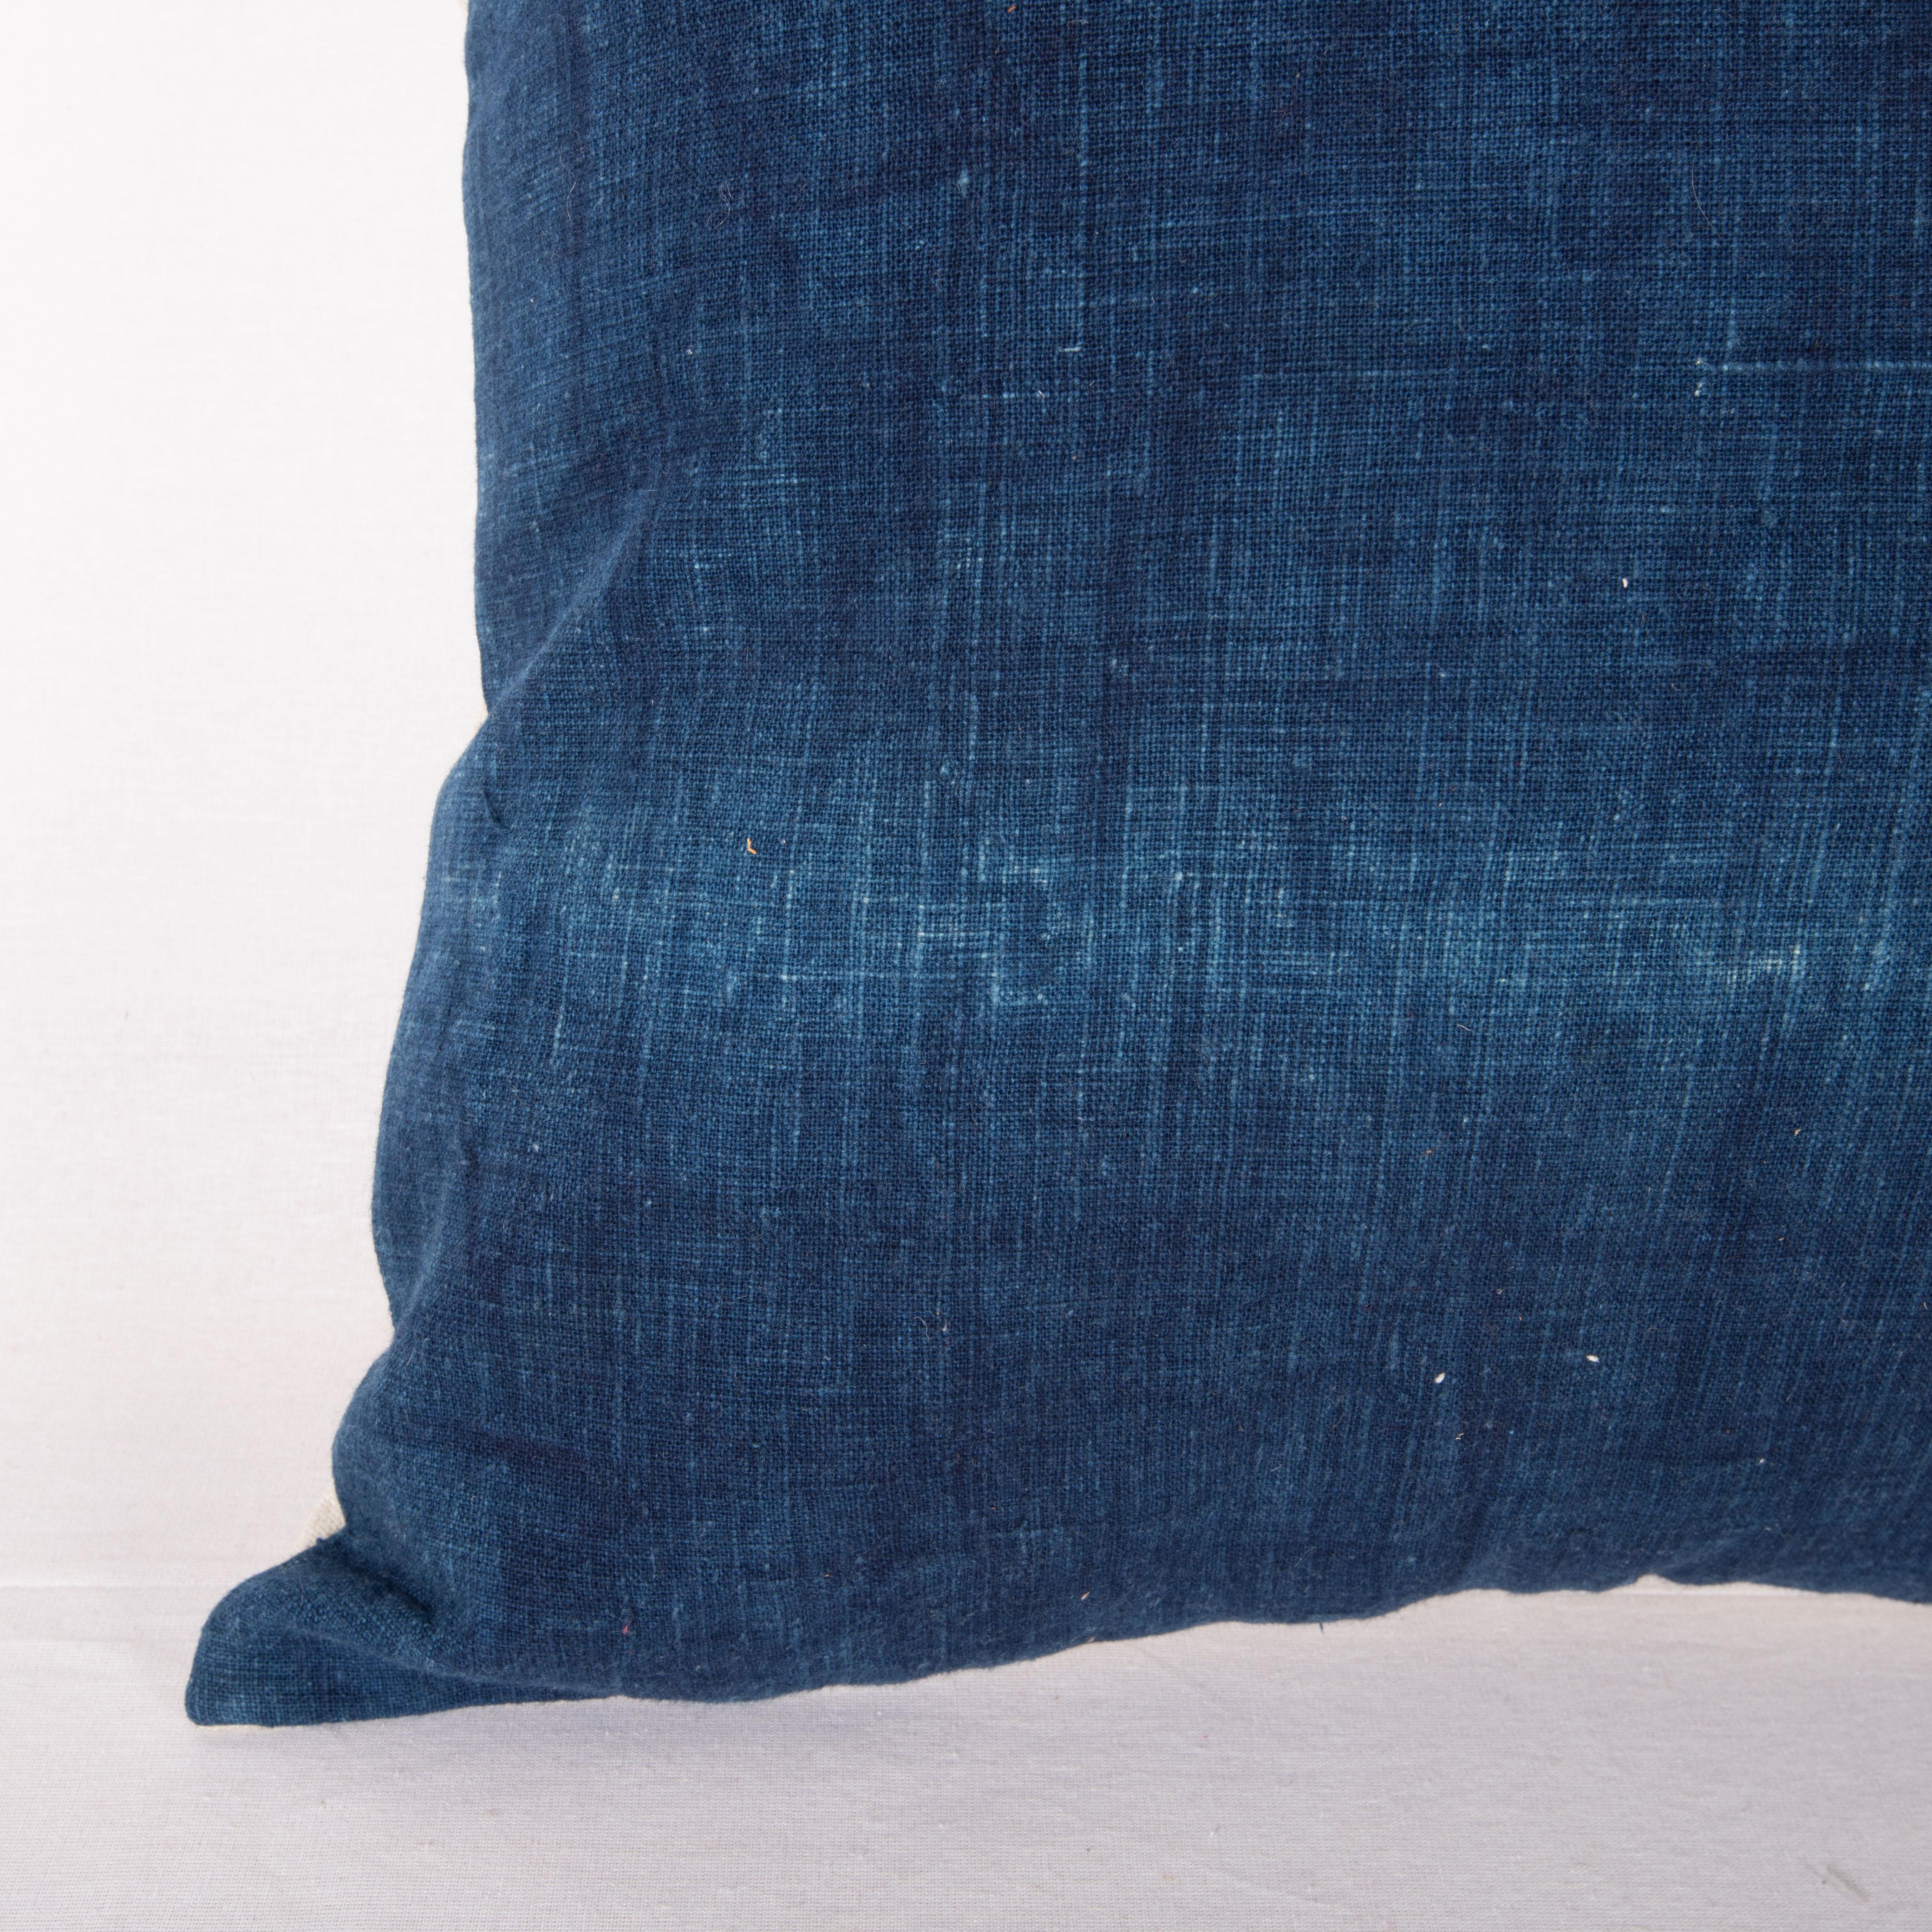 Hand-Woven Antique Indigo Pillow Cover Made from a Quilt Top, Early 20th C. Turkey For Sale